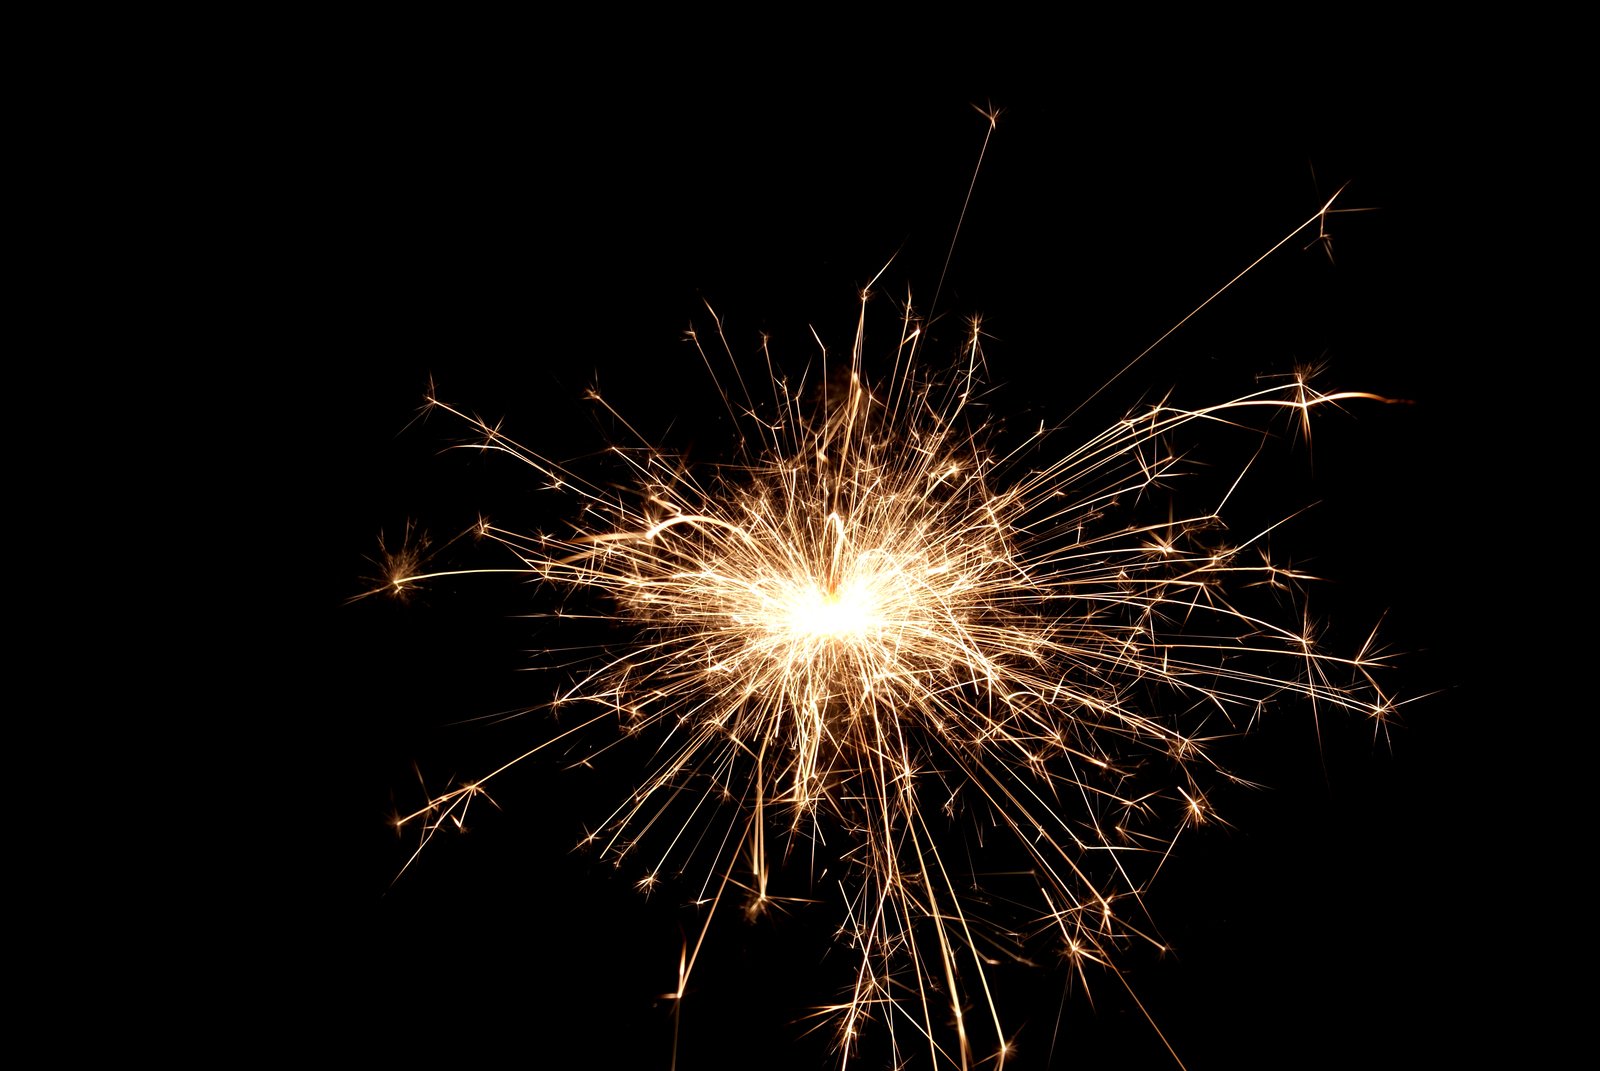 an image of fireworks and sparks in the dark